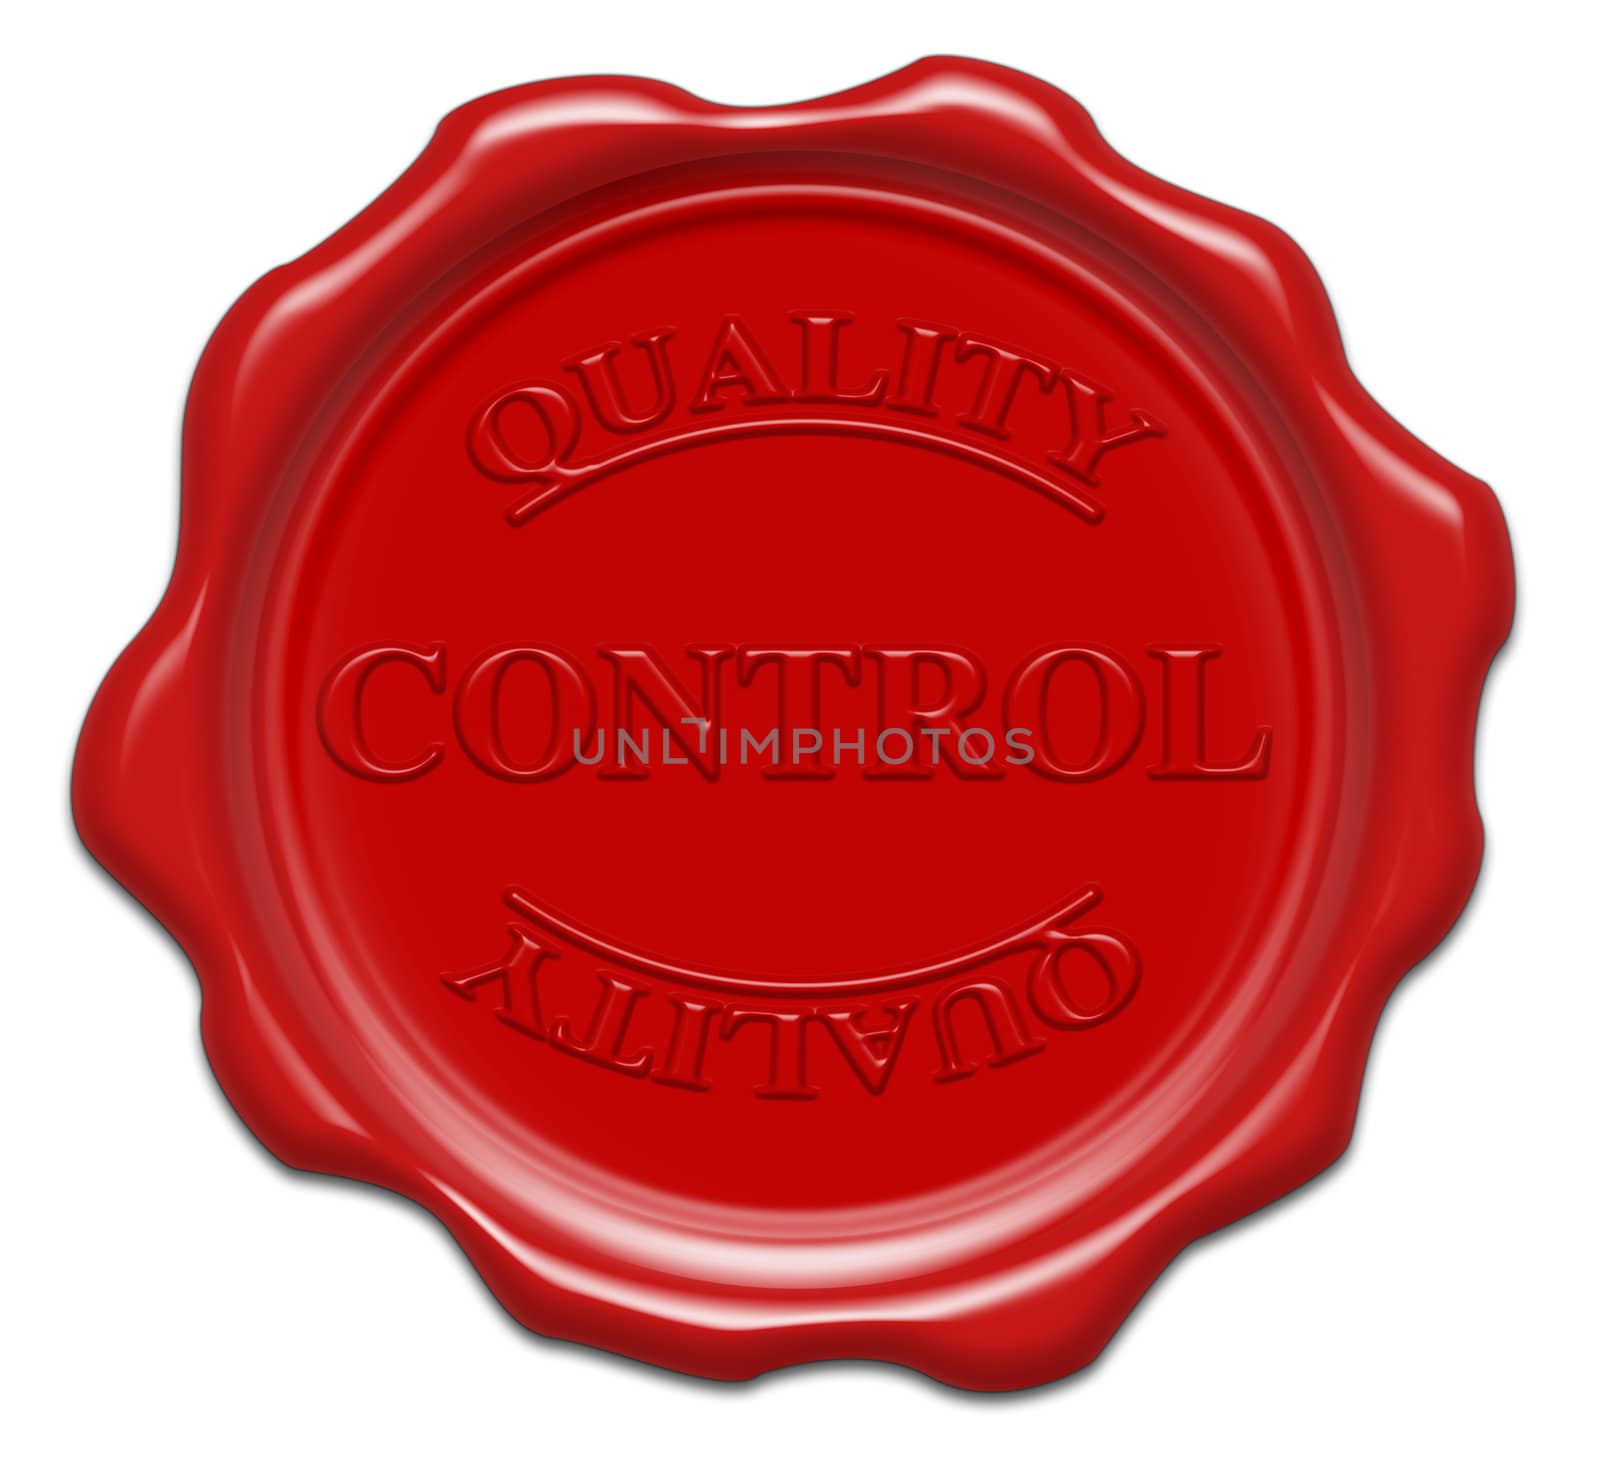 quality control - illustration red wax seal isolated on white background with word : control